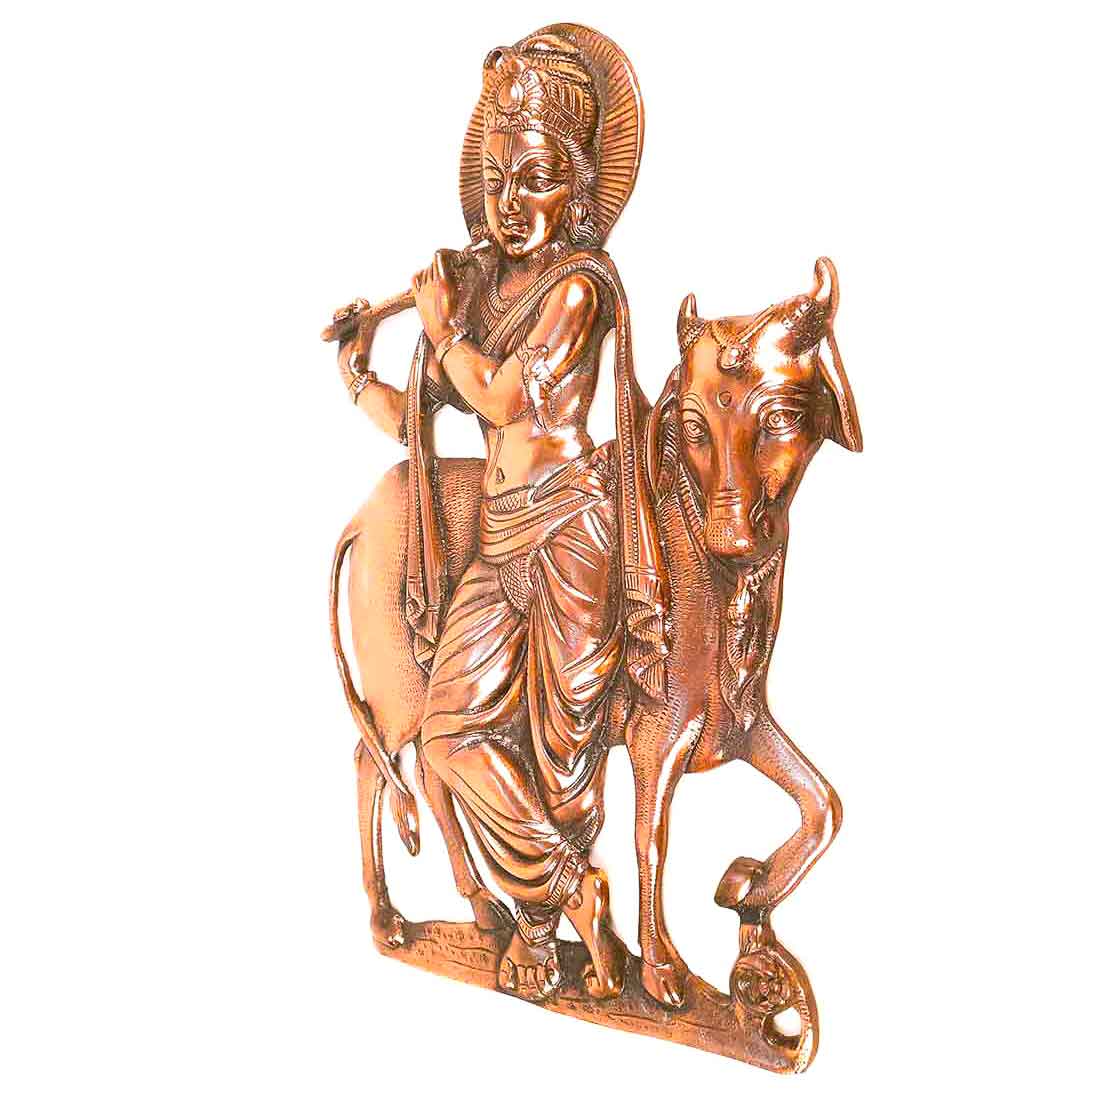 Shri Krishna Wall Hanging Idol | Lord Krishna Playing Flute With Cow Wall Hanging  Statue Murti | Religious & Spiritual Art Sculpture - for Gift, Home, Living Room, Office, Puja Room Decoration  - 22 Inch